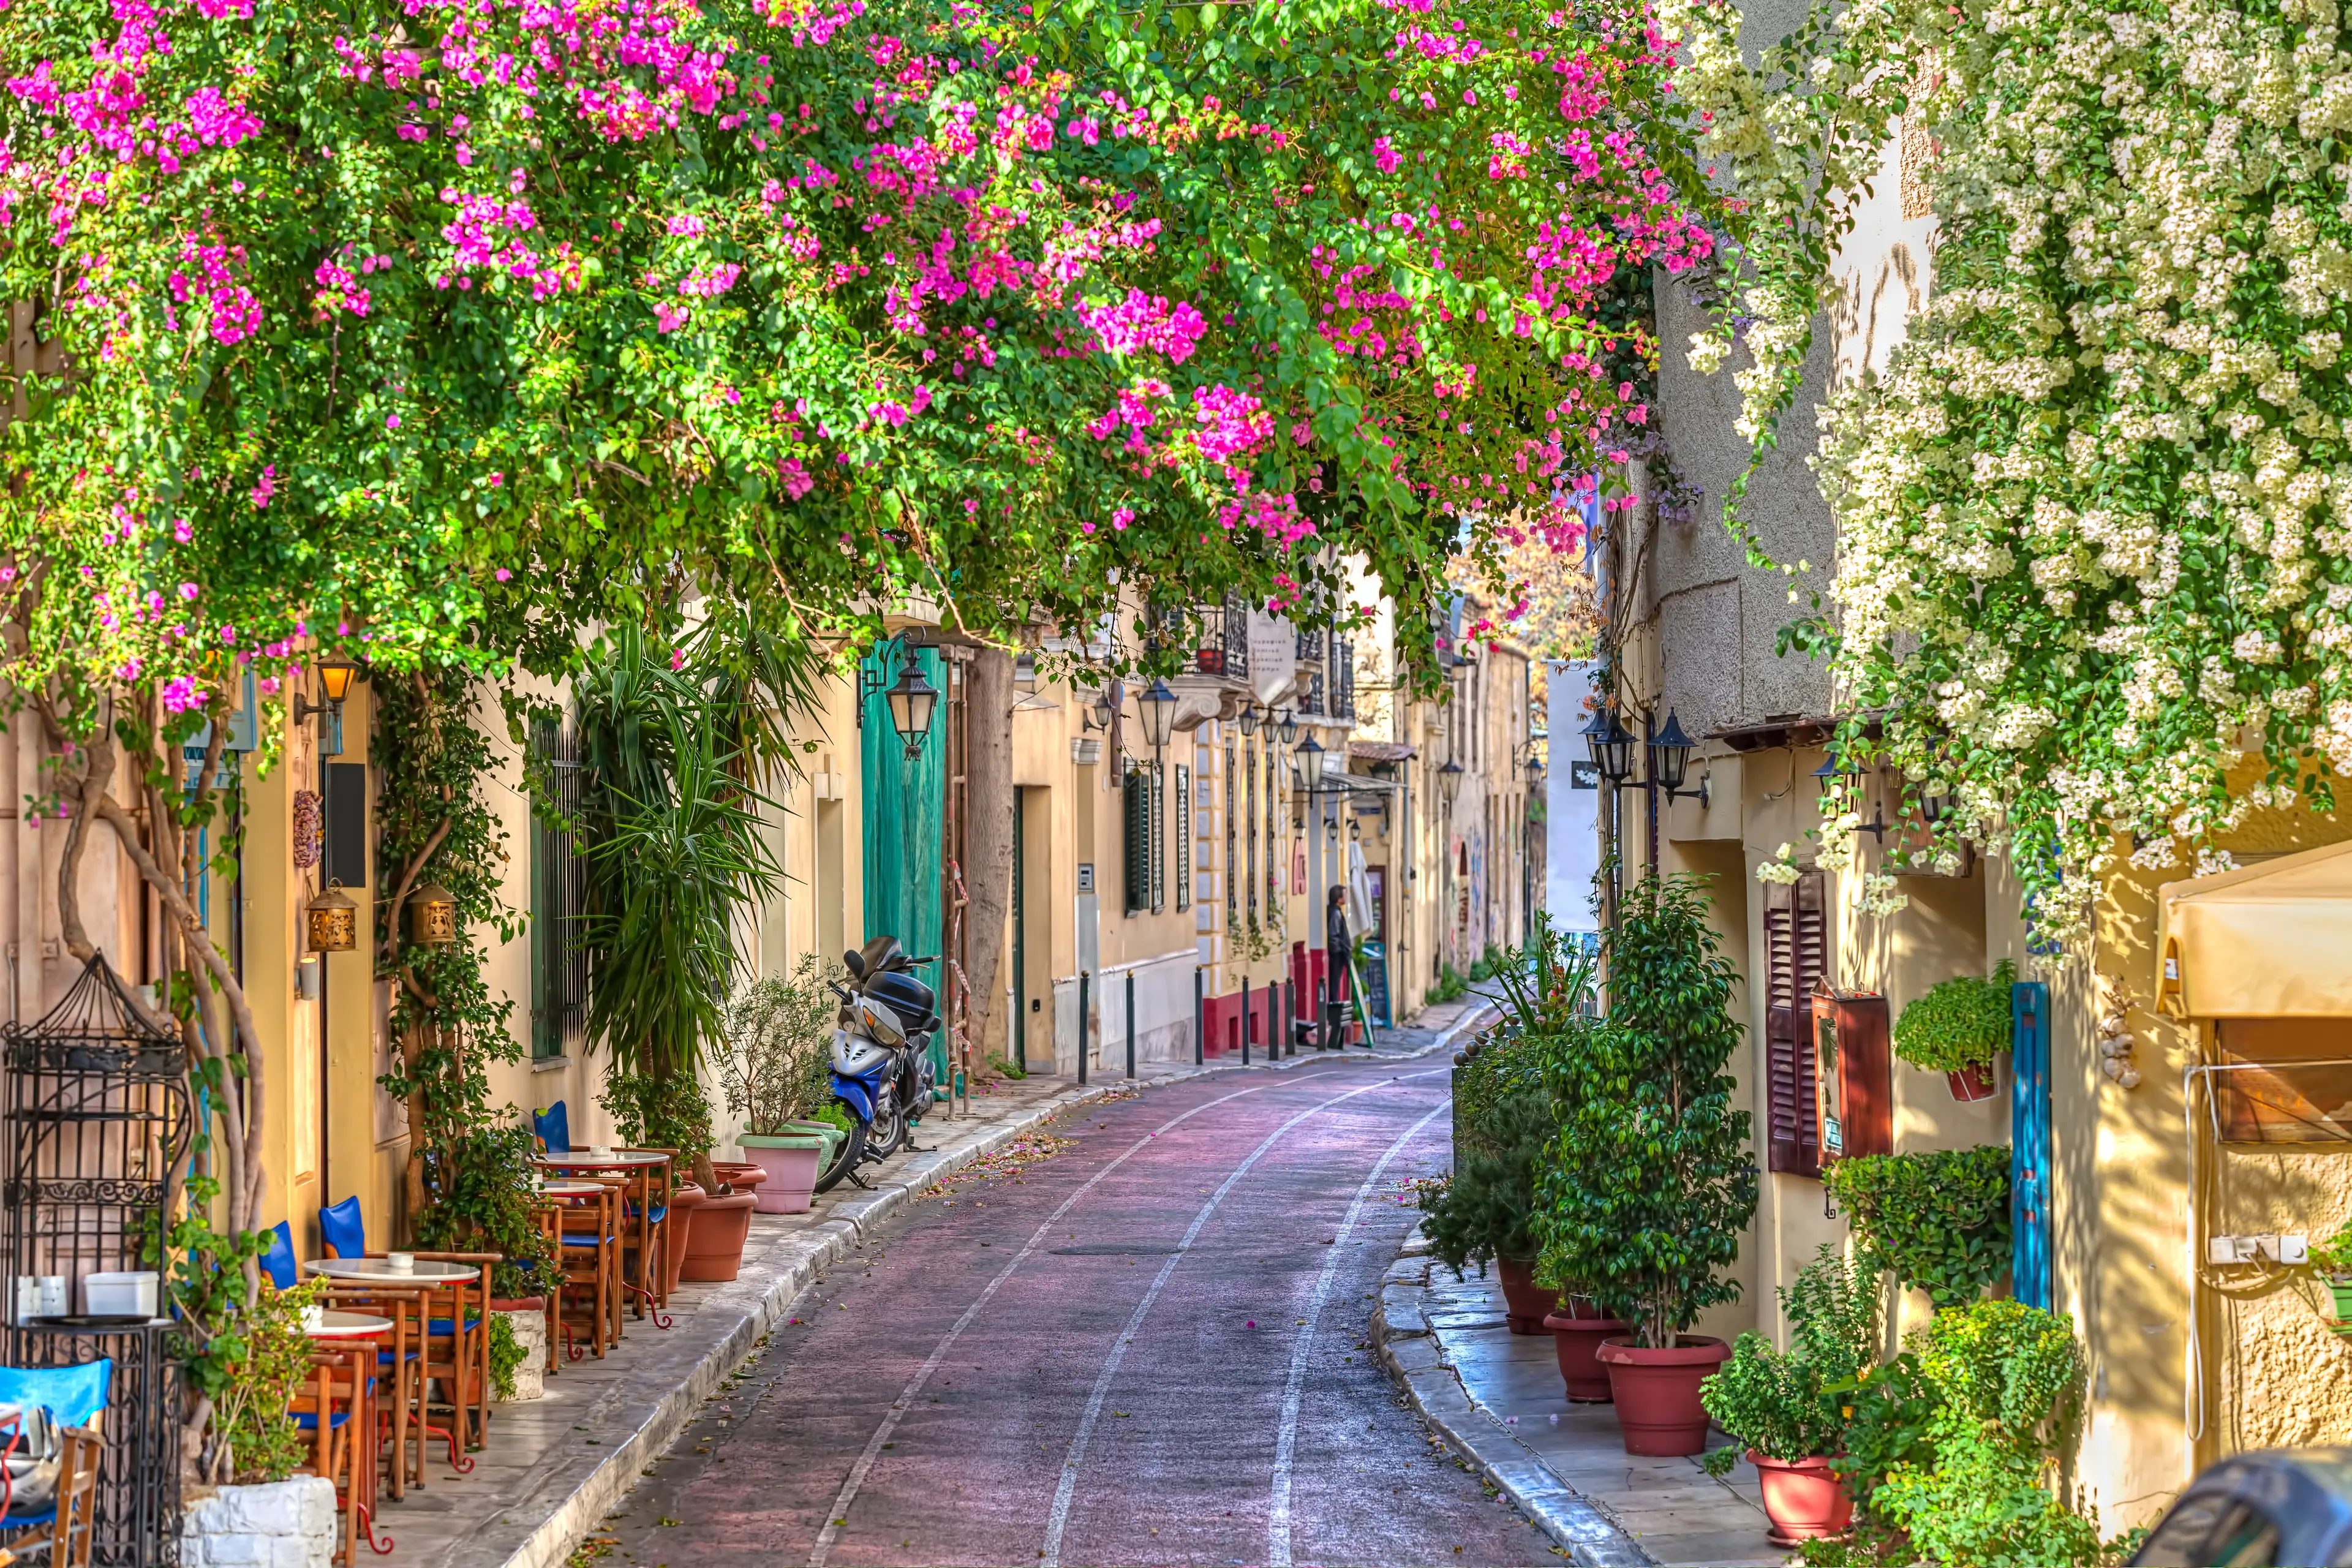 3-Day Athens Itinerary: Shopping & Nightlife with Friends